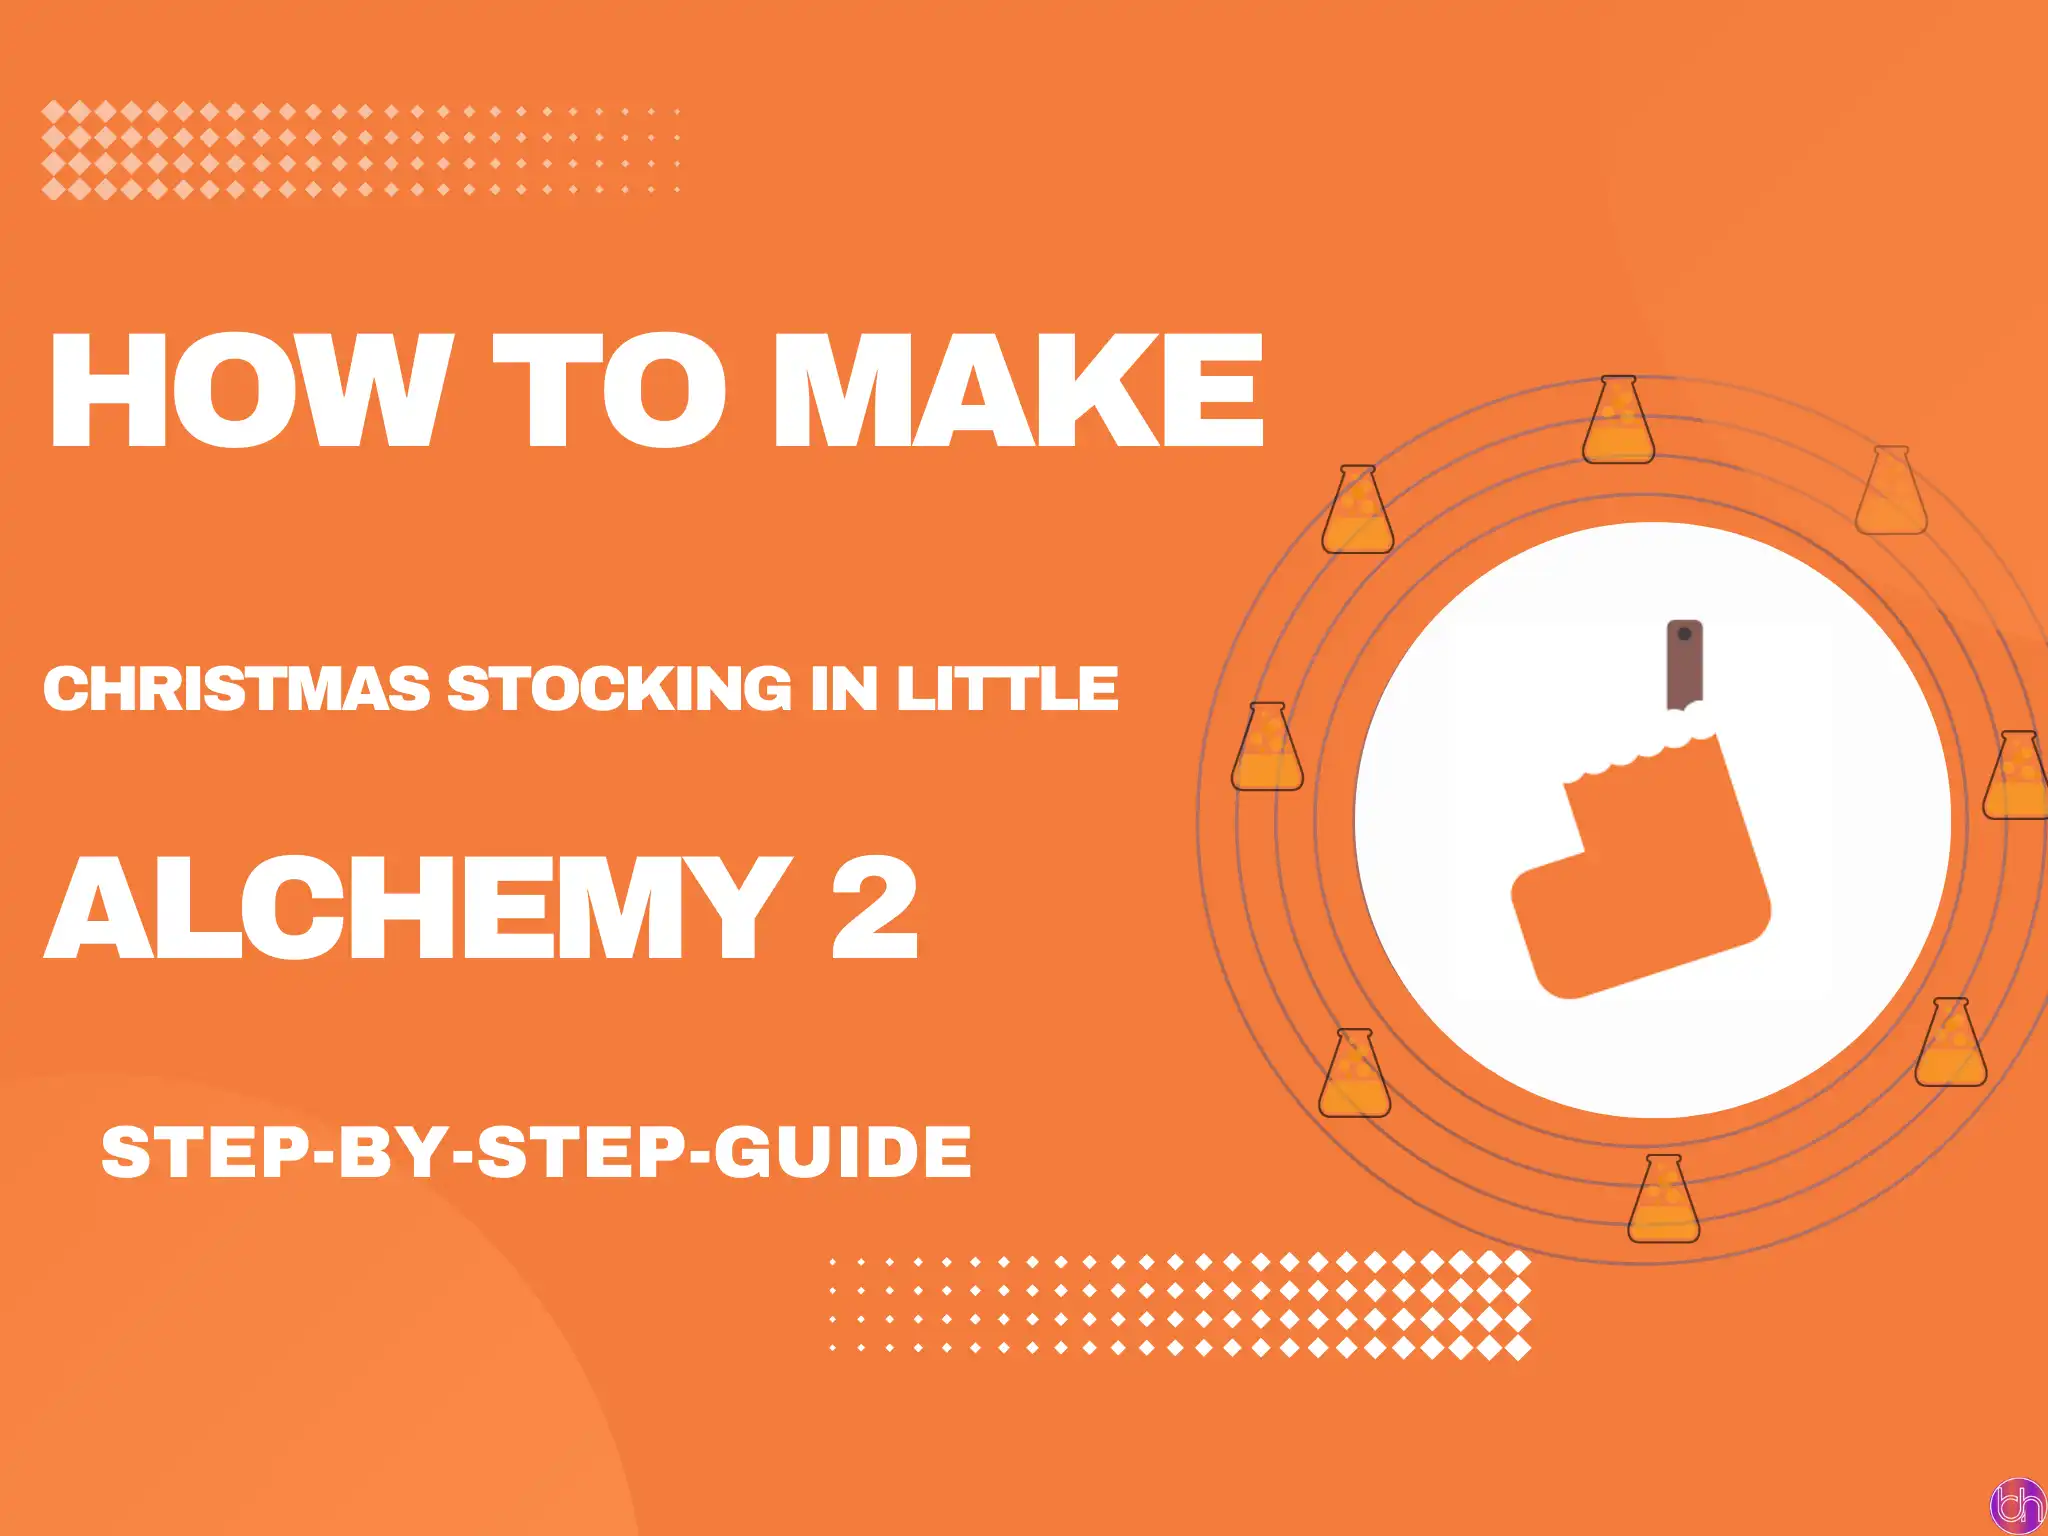 How to make Christmas Stocking in Little Alchemy 2